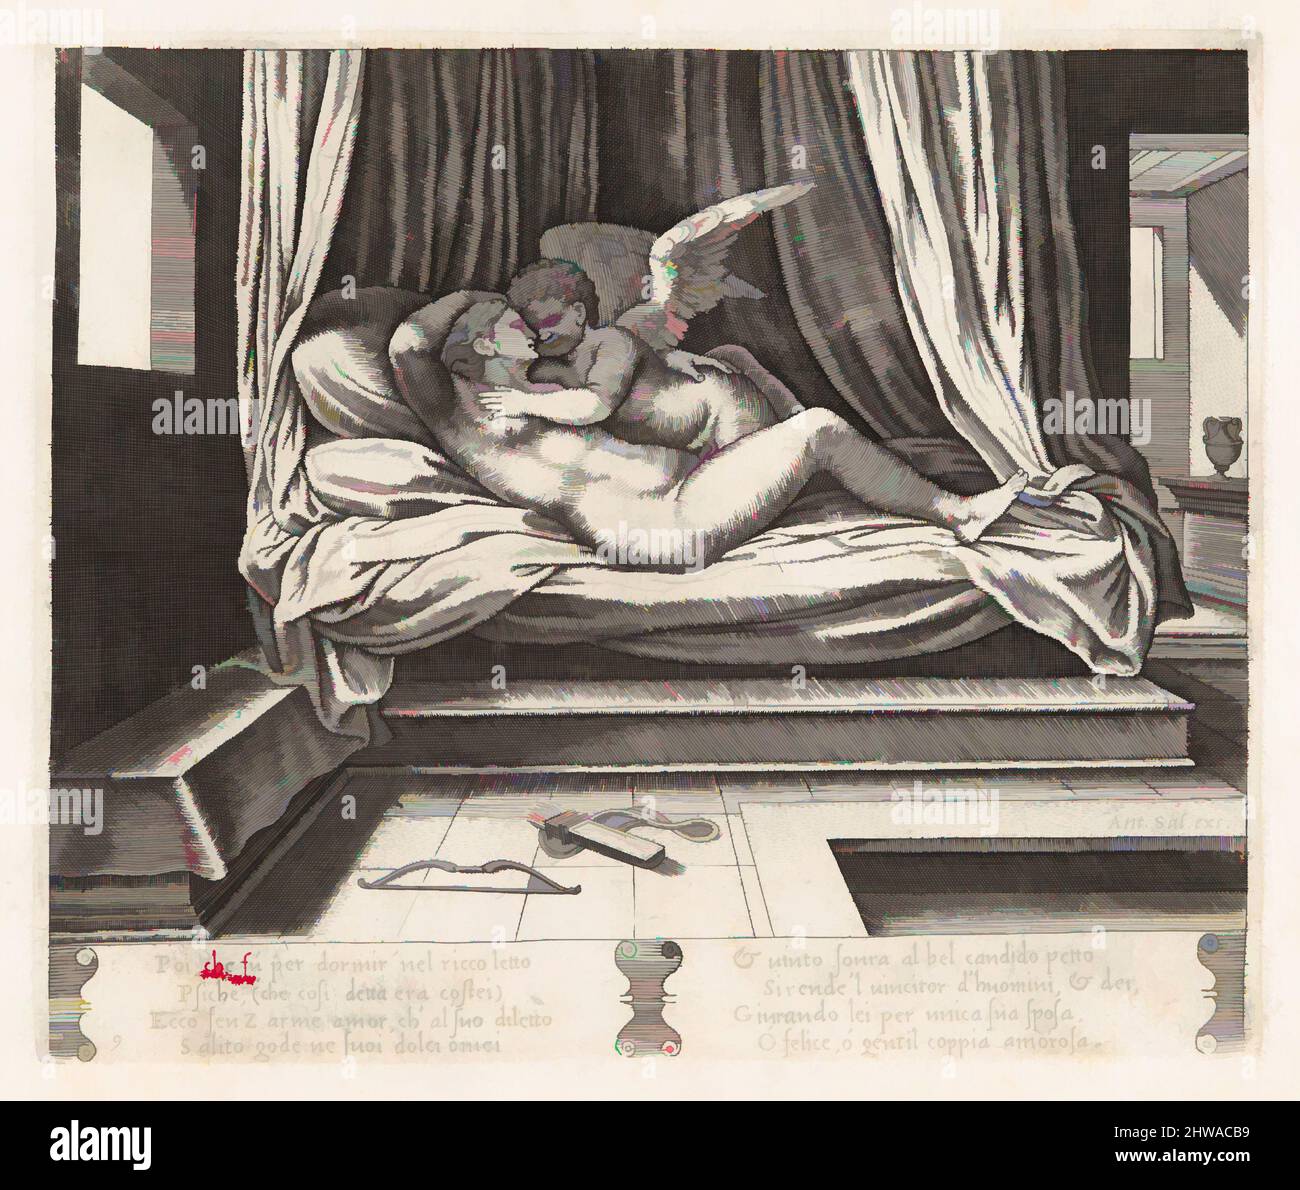 Art inspired by Drawings and Prints, Print, Plate 9: Cupid and Psyche on a bed, from the Story of Cupid and Psyche as told by Apuleius, Classic works modernized by Artotop with a splash of modernity. Shapes, color and value, eye-catching visual impact on art. Emotions through freedom of artworks in a contemporary way. A timeless message pursuing a wildly creative new direction. Artists turning to the digital medium and creating the Artotop NFT Stock Photo